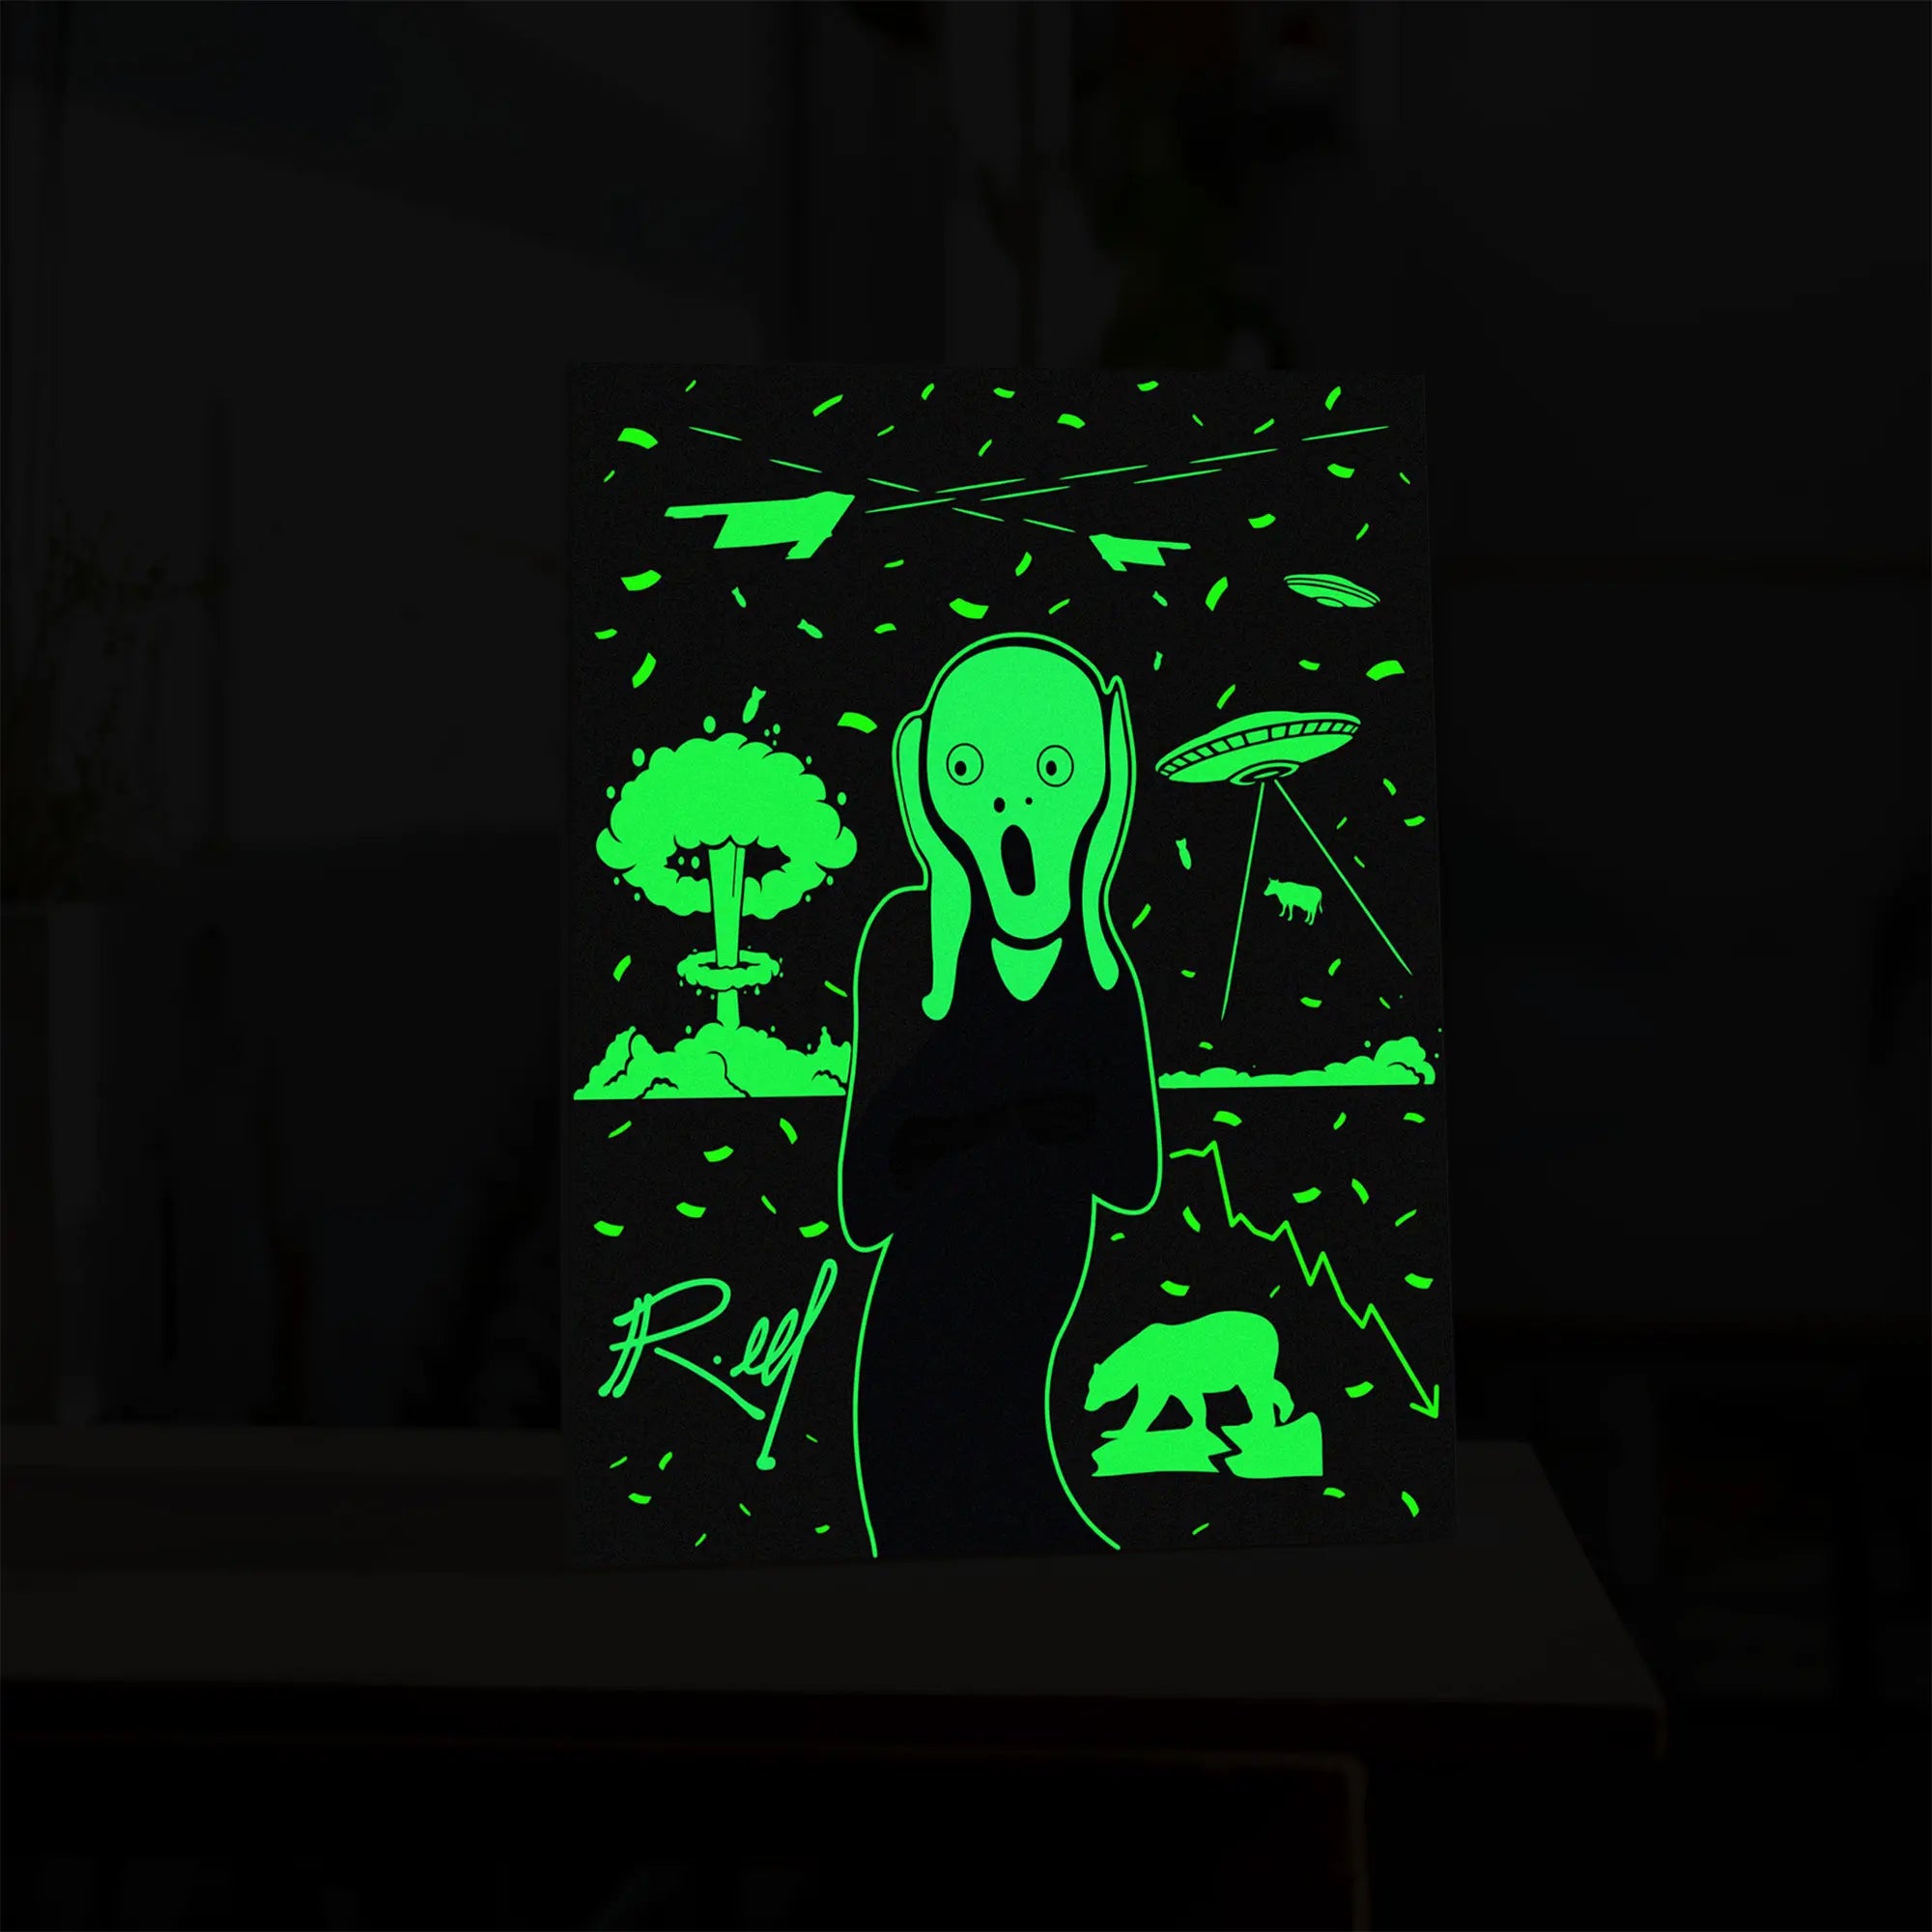 The scream glow in the dark painting on black background